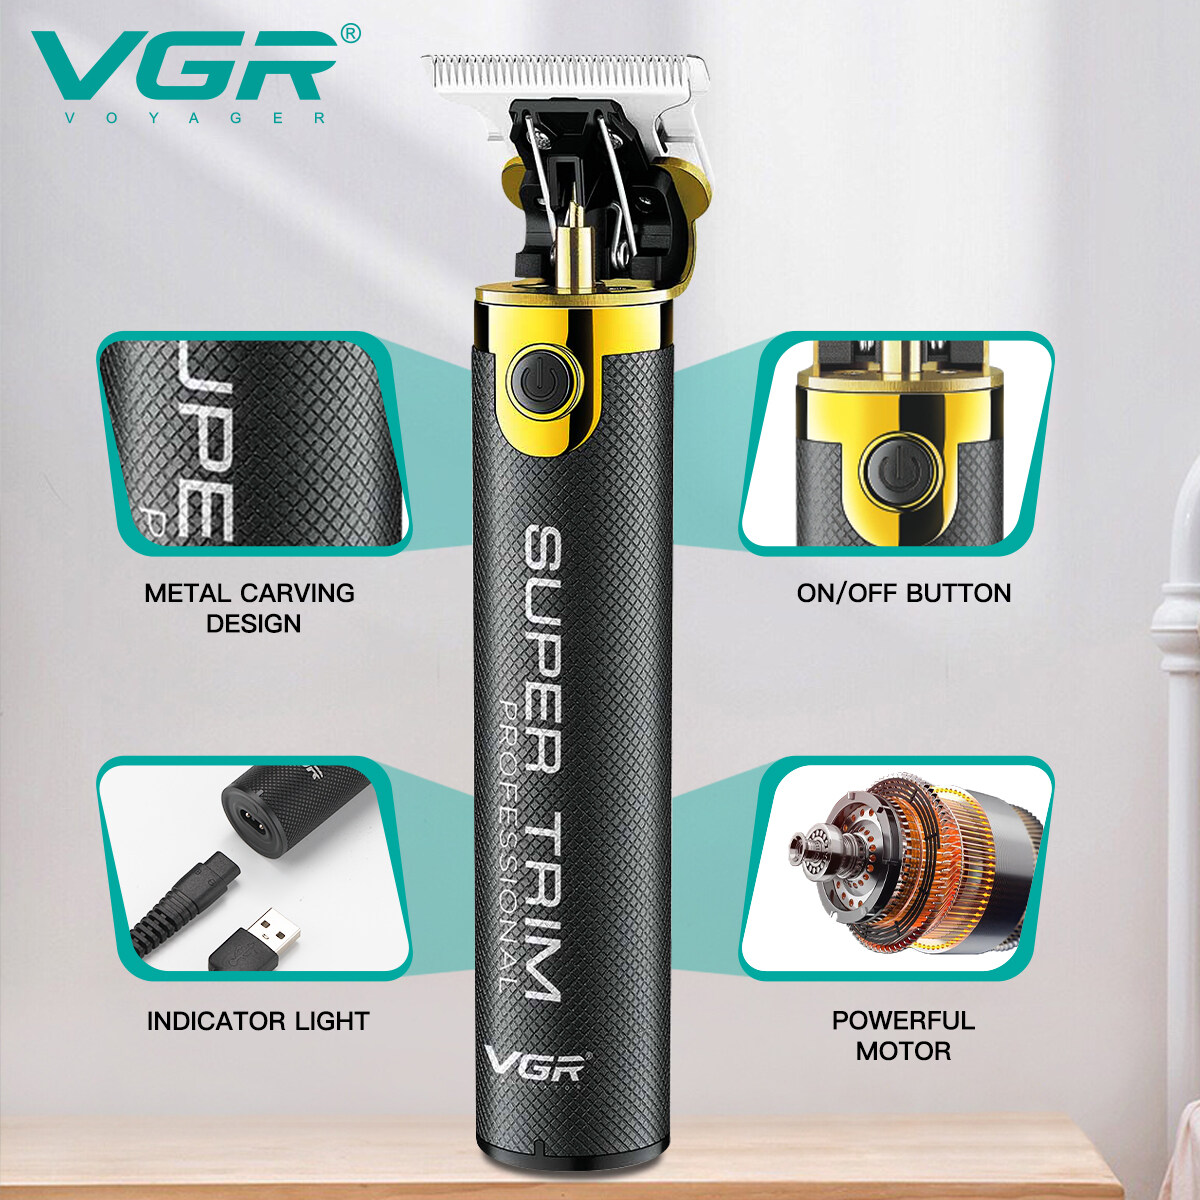 professional hair clipper wholesale, domestic use hair clipper suppliers, high quality hair clipper, oem hair clipper, top trimmer manufacturers